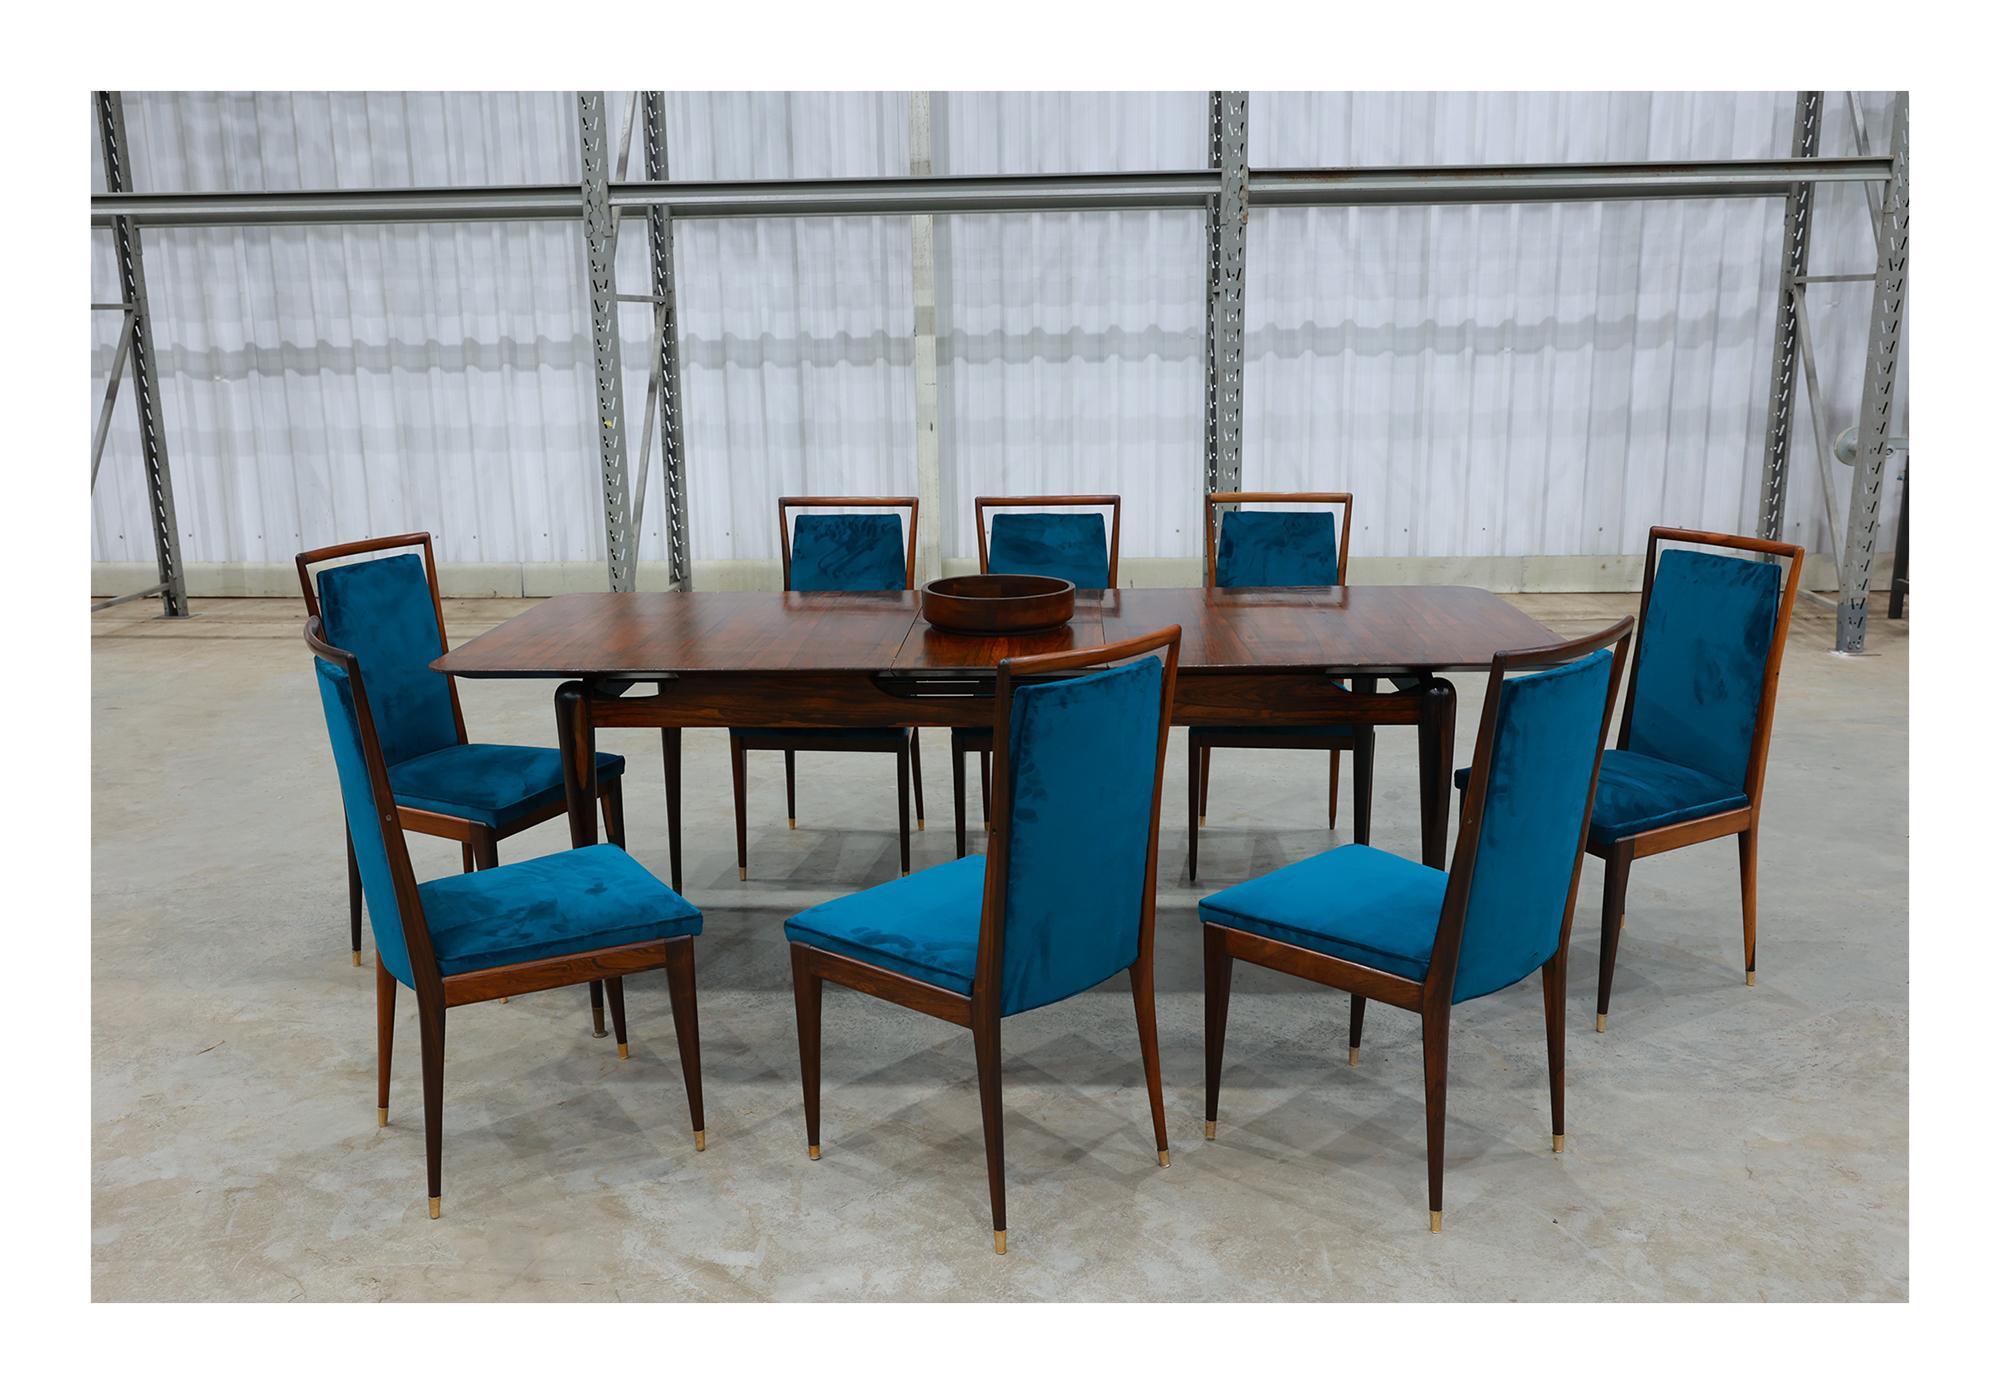 Hand-Painted Brazilian Modern 8 Chair Set in Hardwood & Fabric, Giuseppe Scapinelli, c. 1950 For Sale